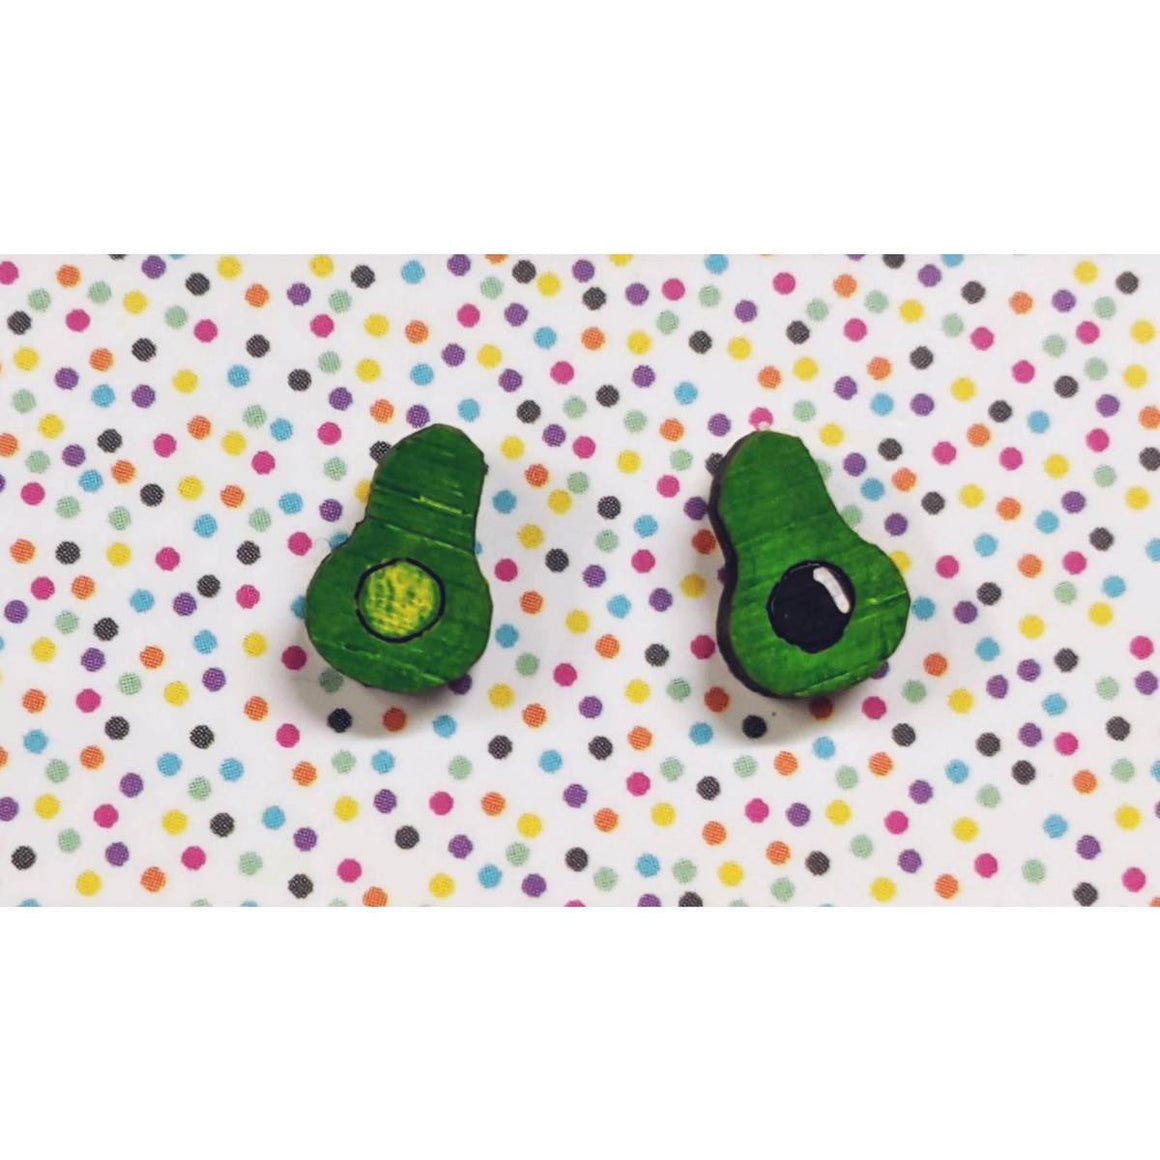 A pair of intricately hand coloured studs depicting two halves of an avocado that has been cut open. One side has the avocado stone present.